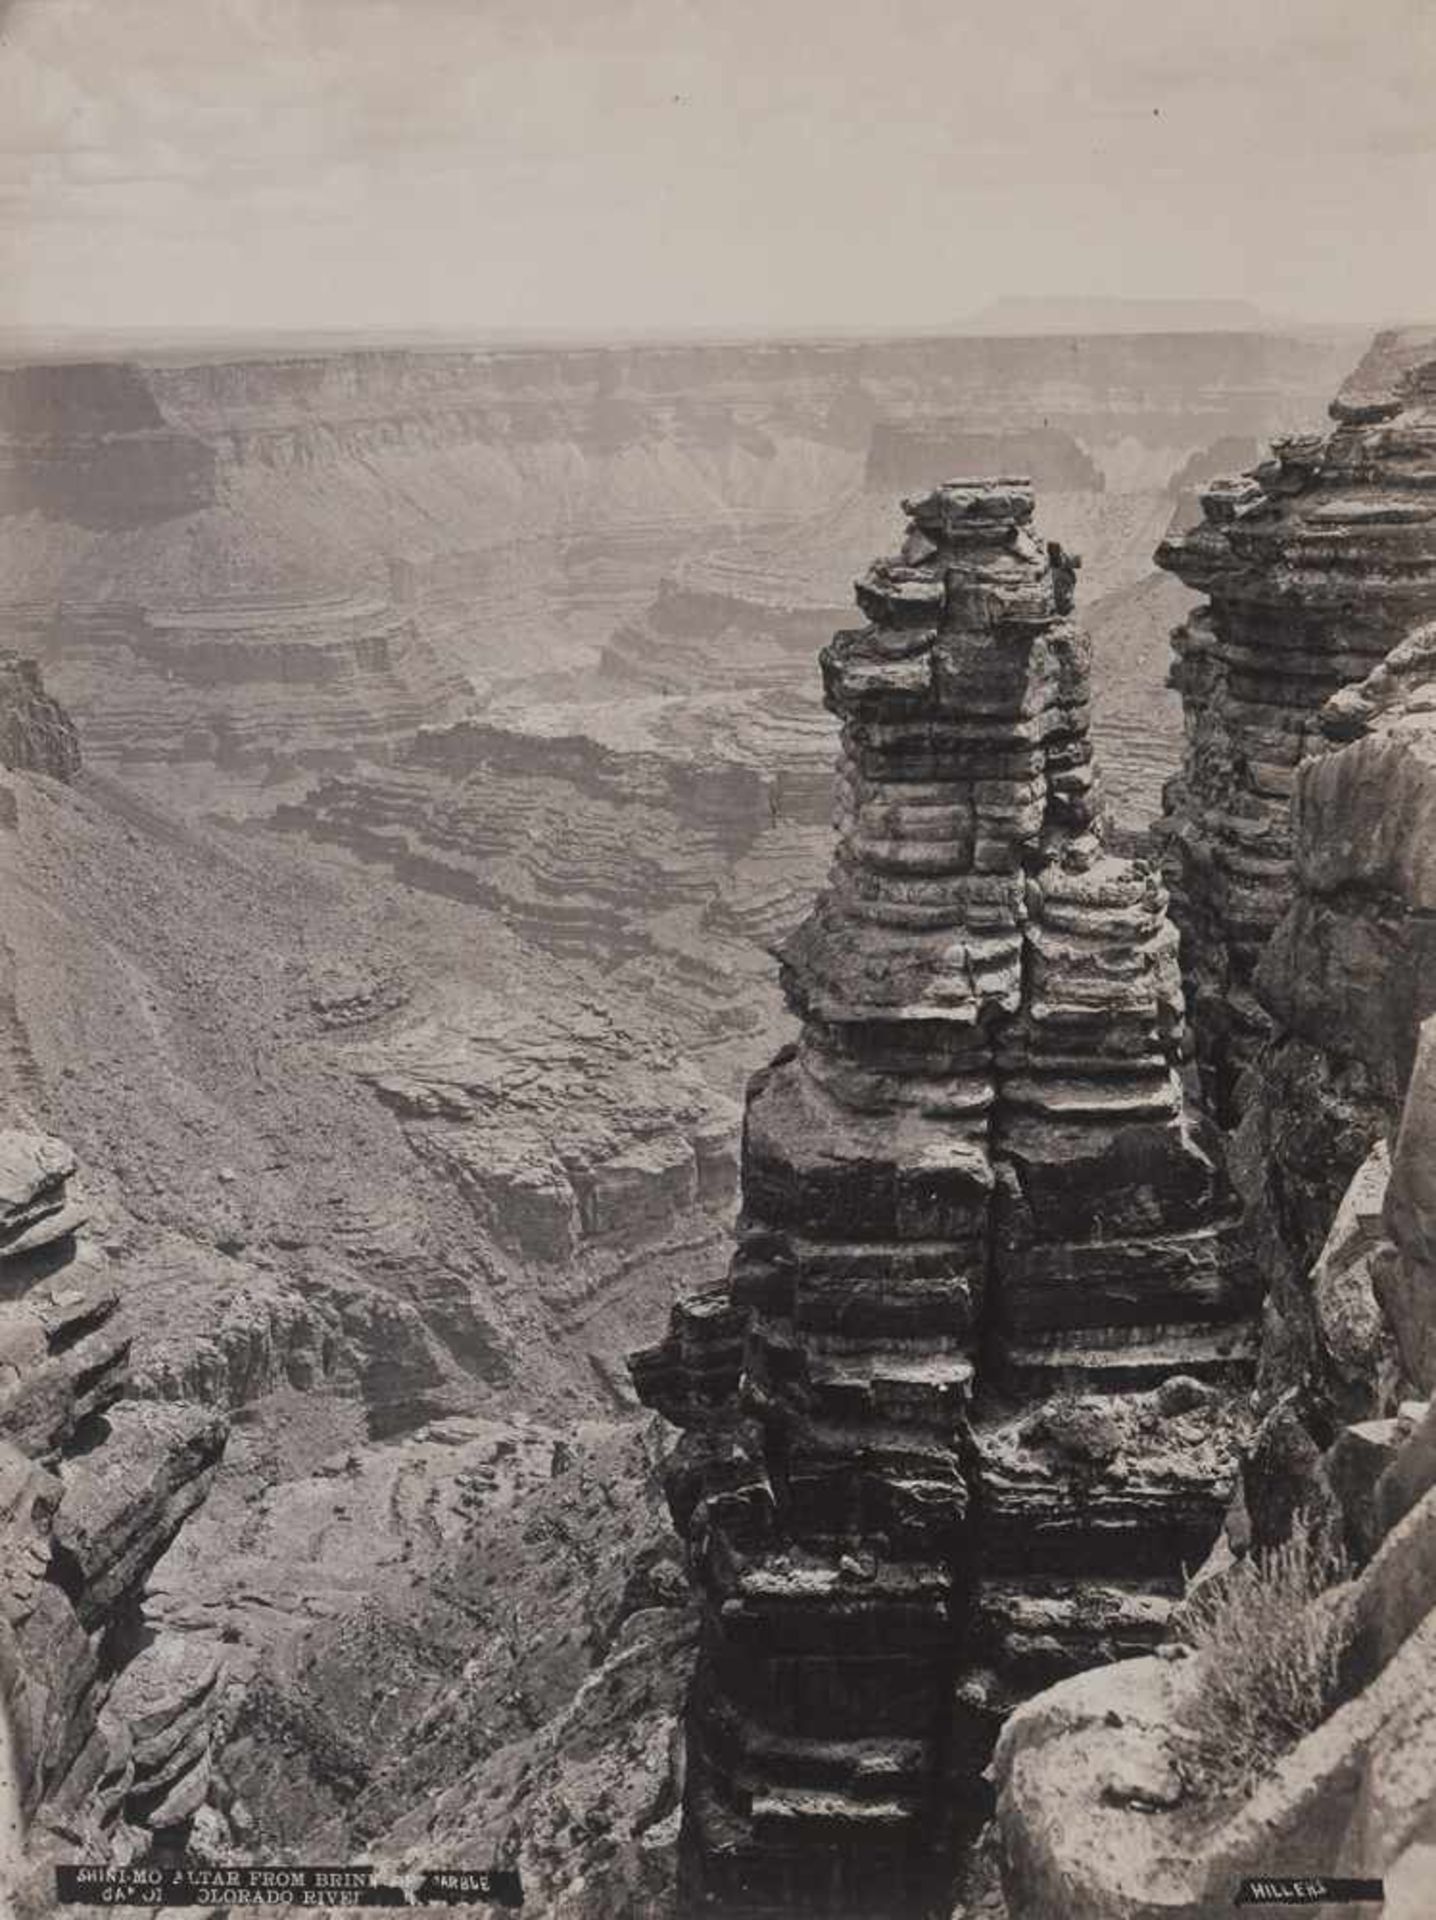 Hillers, John K. and unknown: "Shinimo Altar from Brink of Marble Canyon of the Colorado River, - Bild 2 aus 3